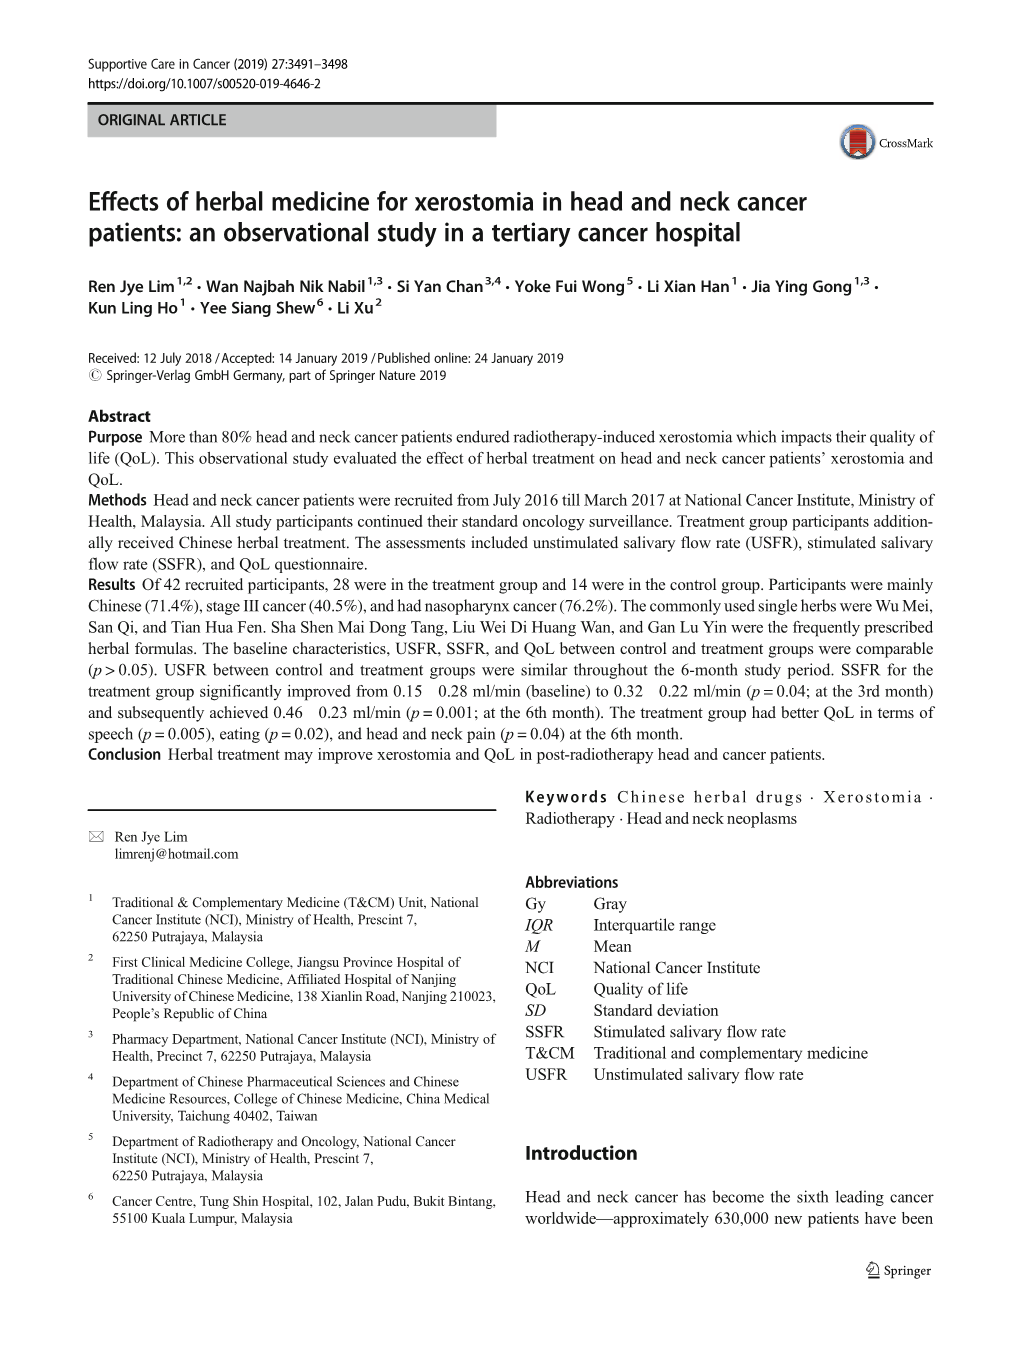 Effects of Herbal Medicine for Xerostomia in Head and Neck Cancer Patients: an Observational Study in a Tertiary Cancer Hospital